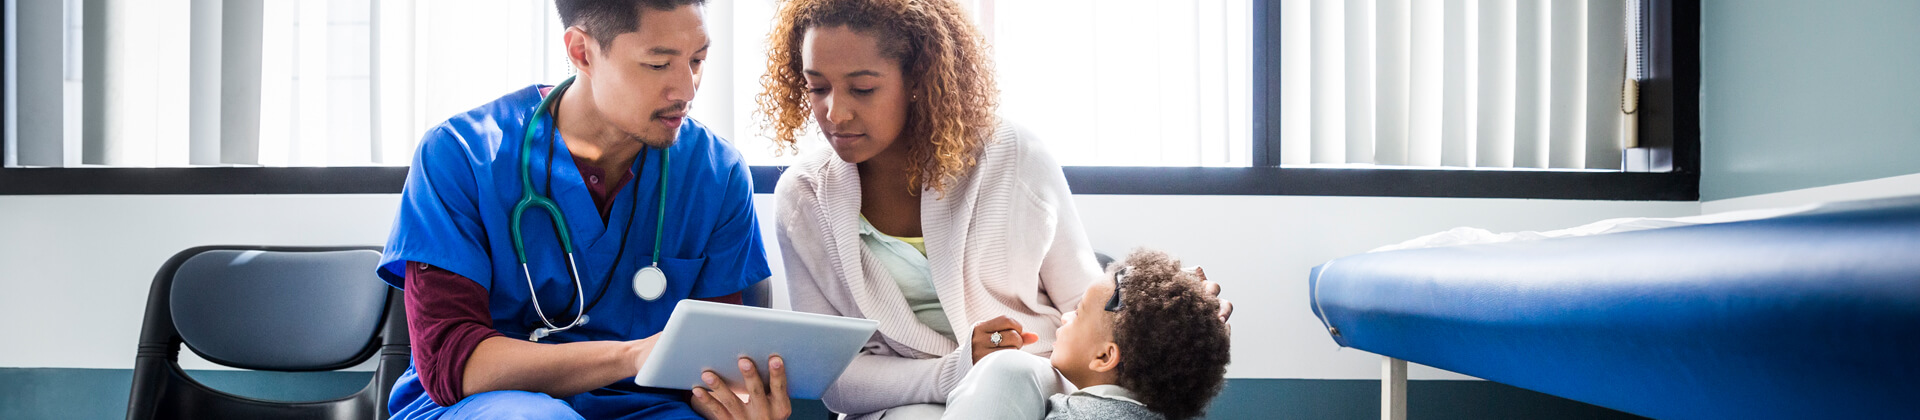 woman looks at a tablet with a medical professional while her young son looks on